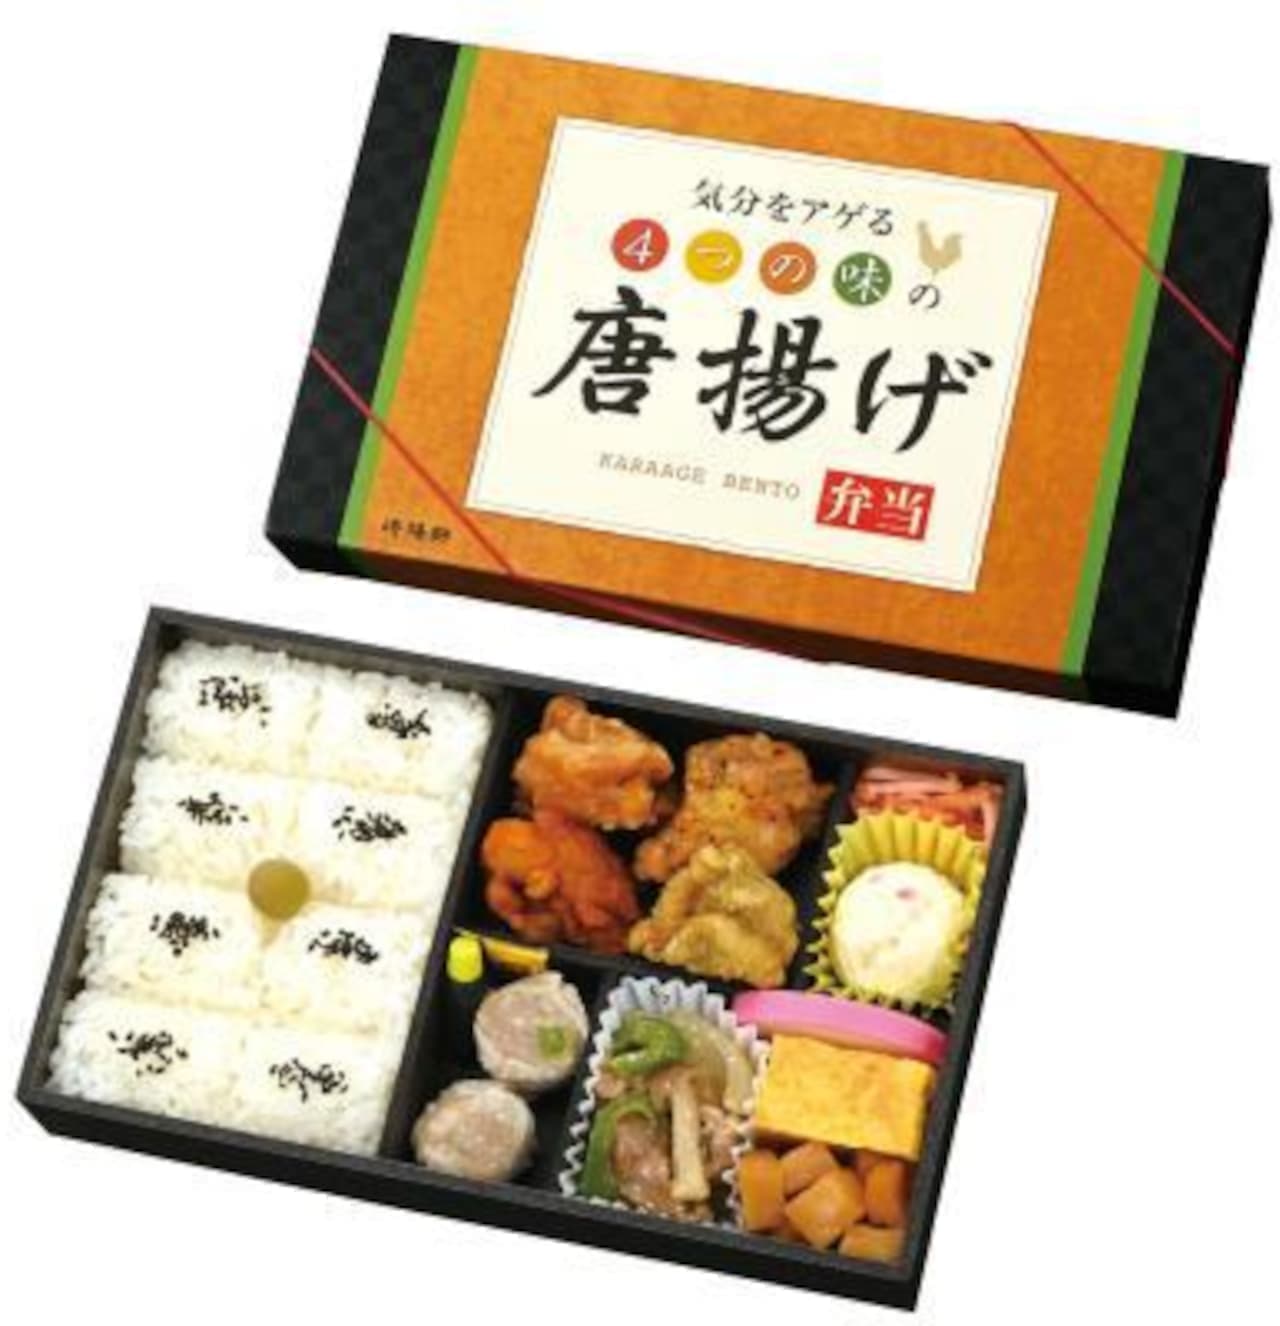 For a limited time at Kiyoken, "Four flavors of fried chicken lunch box" and "Four kinds of shumai set as a reward for me"